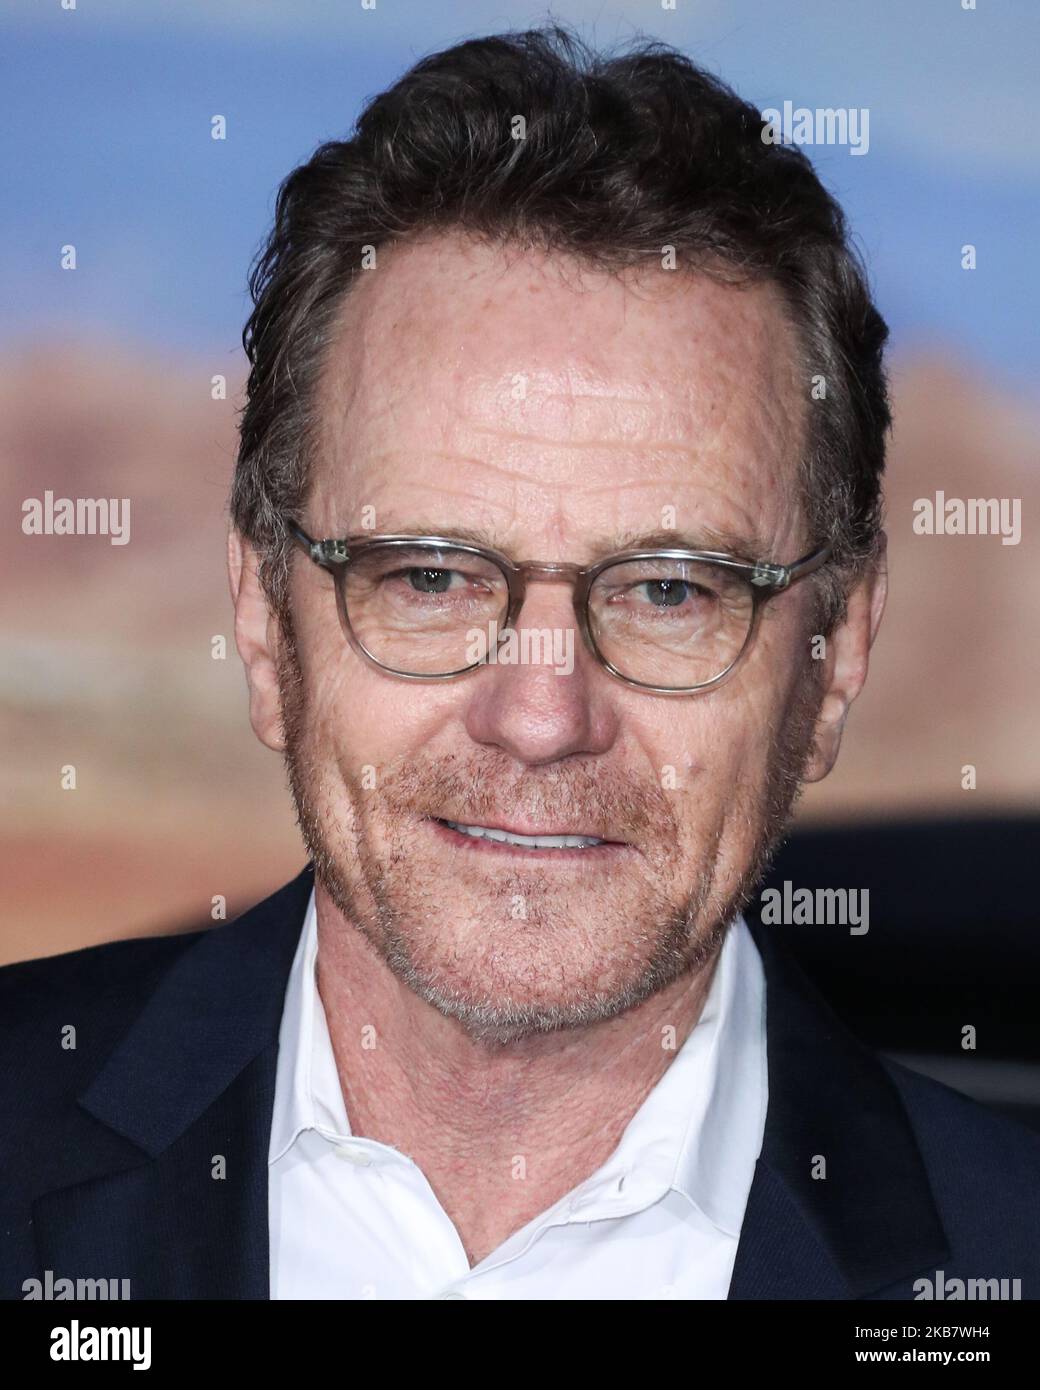 WESTWOOD, LOS ANGELES, CALIFORNIA, USA - OCTOBER 07: Actor Bryan Cranston arrives at the Los Angeles Premiere Of Netflix's 'El Camino: A Breaking Bad Movie' held at the Regency Village Theatre on October 7, 2019 in Westwood, Los Angeles, California, United States. (Photo by Xavier Collin/Image Press Agency/NurPhoto) Stock Photo